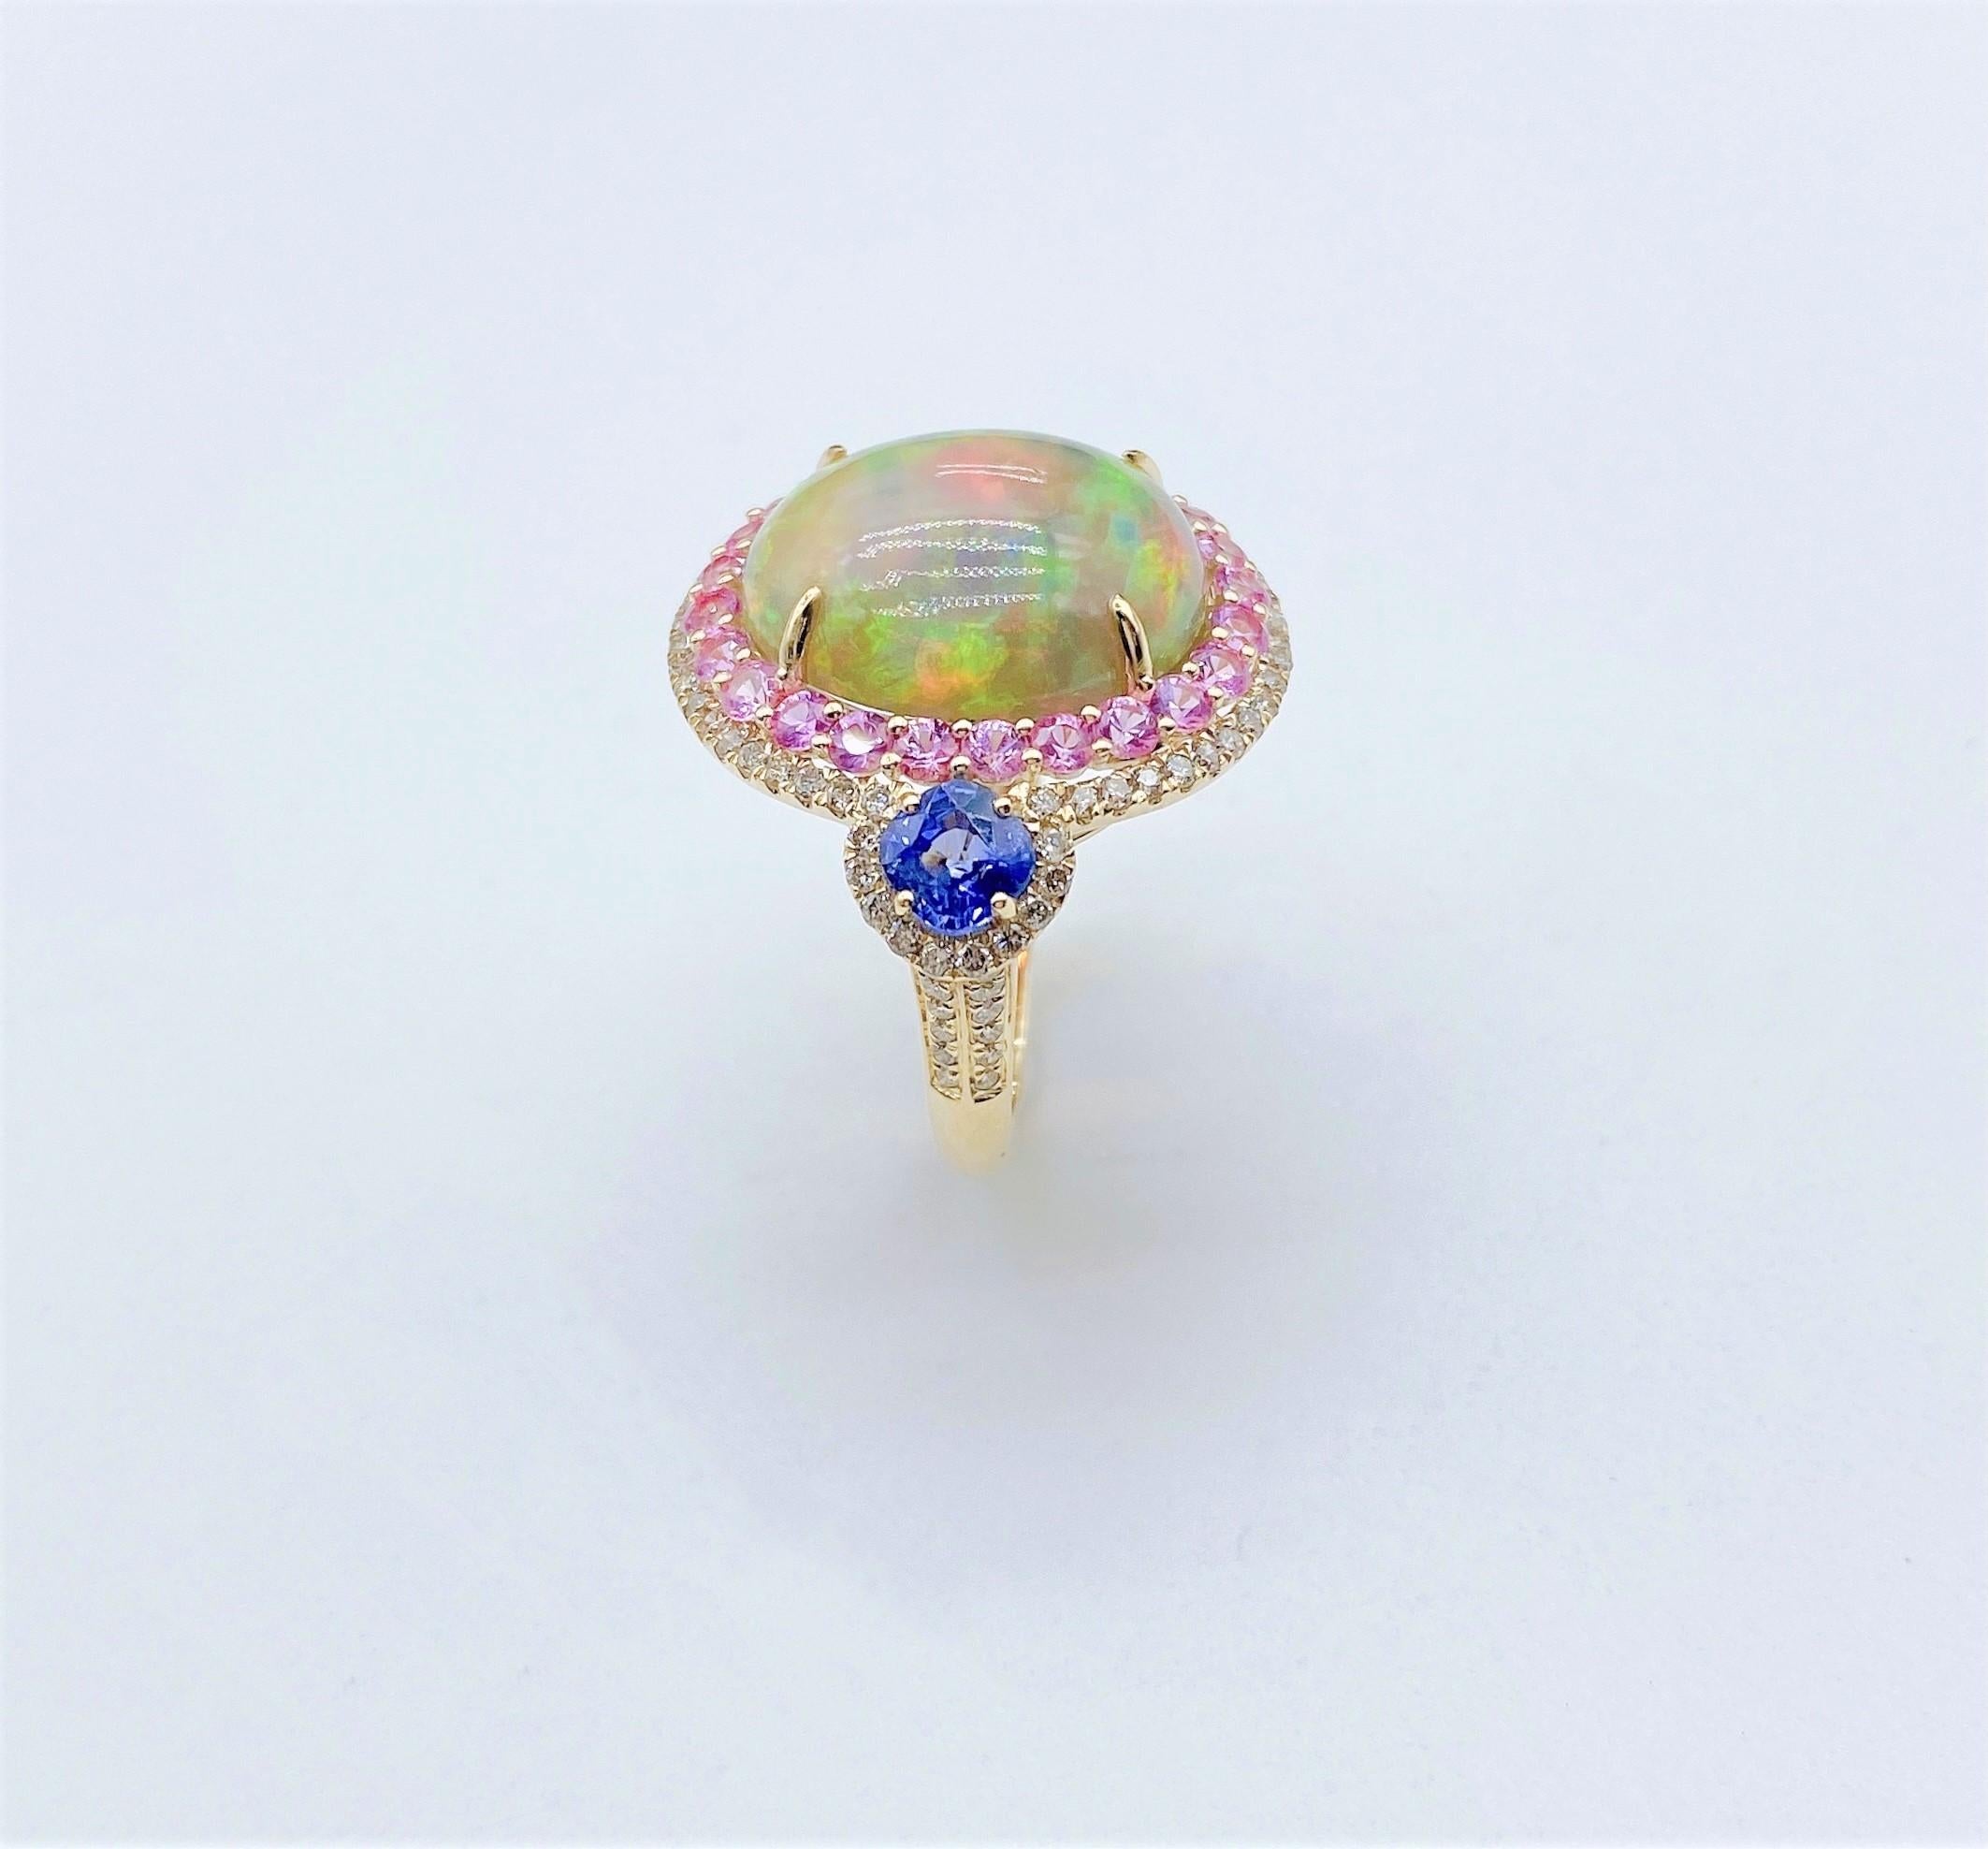 The Following Items we are offering is this Rare Important Radiant 18KT Gold LARGE Glittering and Sparkling Magnificent Fancy Multi colored Opal and Pink Sapphire Blue Sapphire White Diamond Ring. Ring Contains a Beautiful Gorgeous Large Round Opal